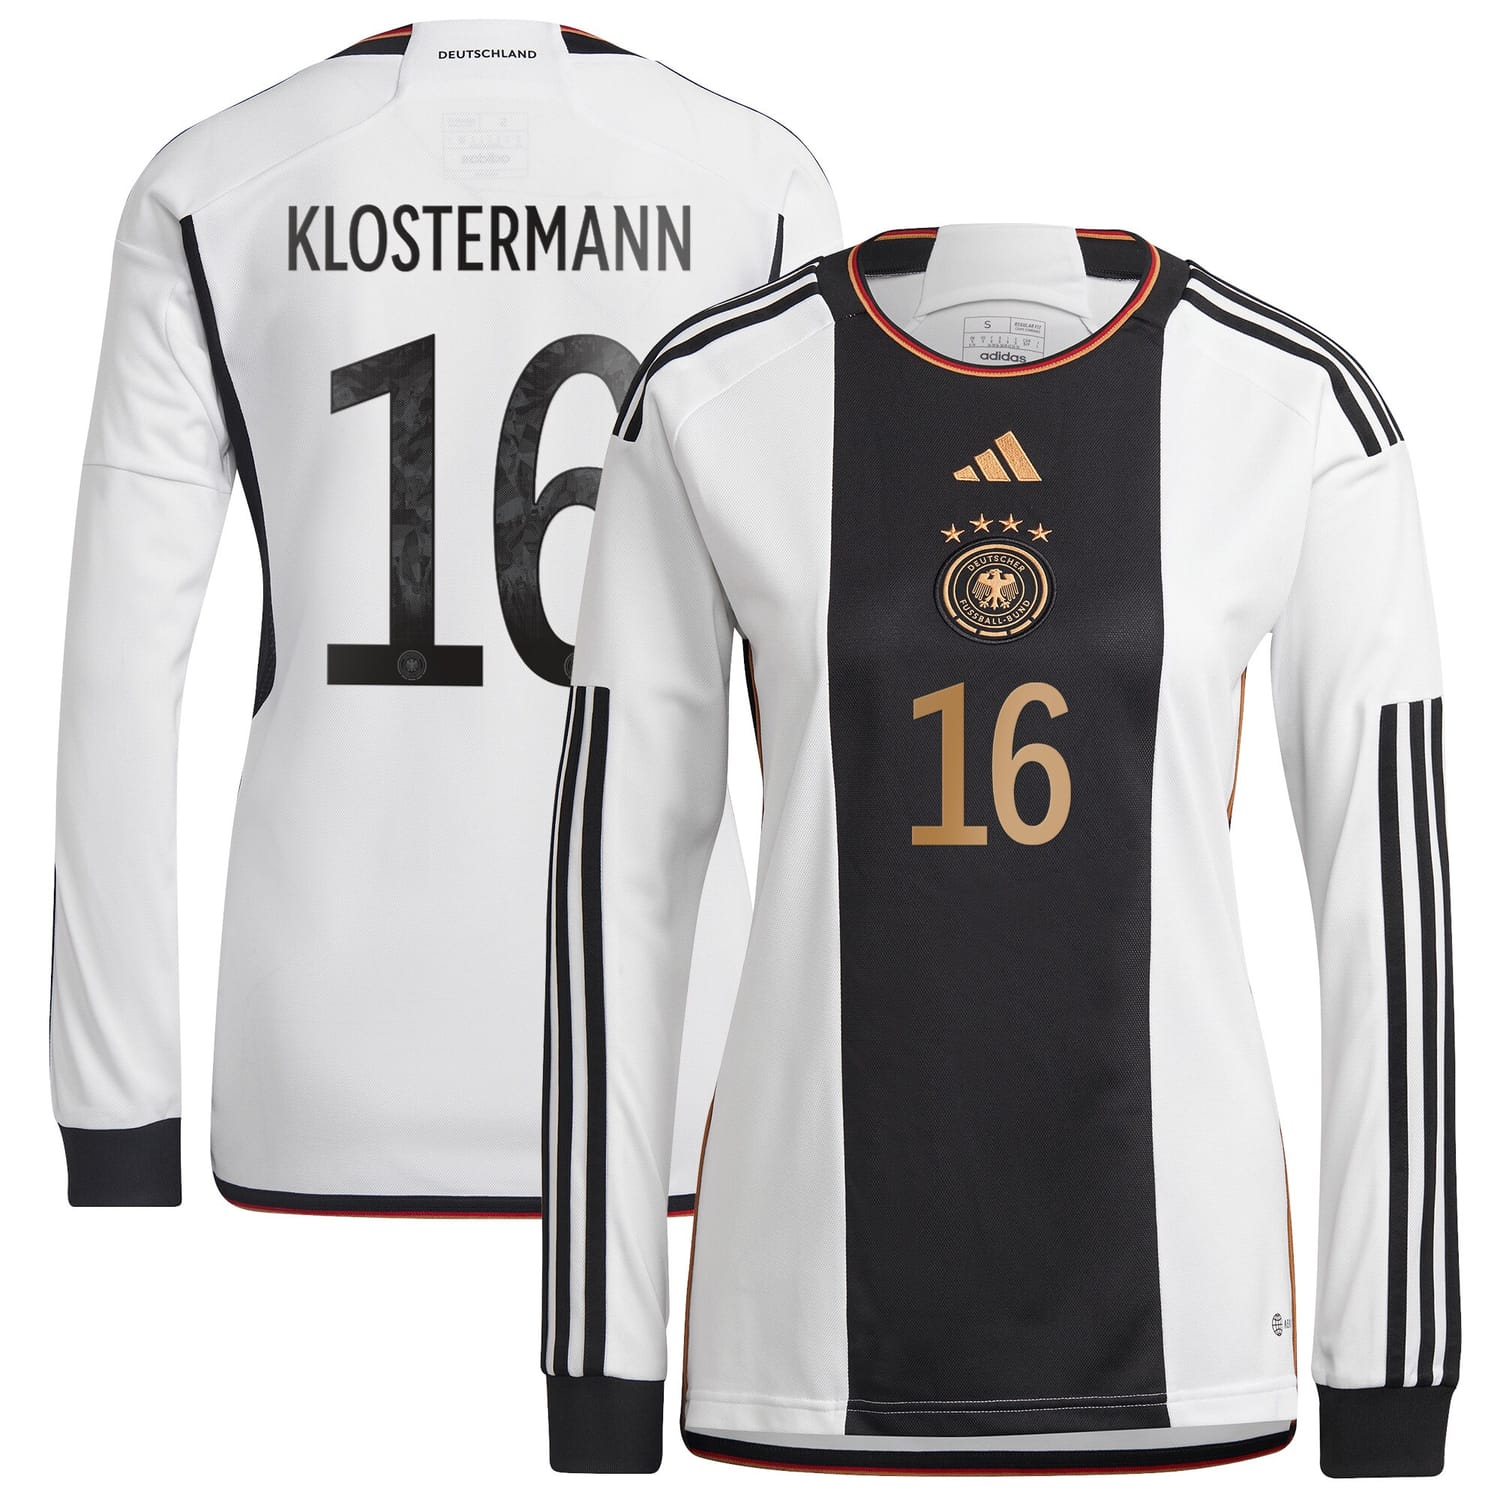 Germany National Team Home Jersey Shirt Long Sleeve player Lukas Klostermann 16 printing for Women